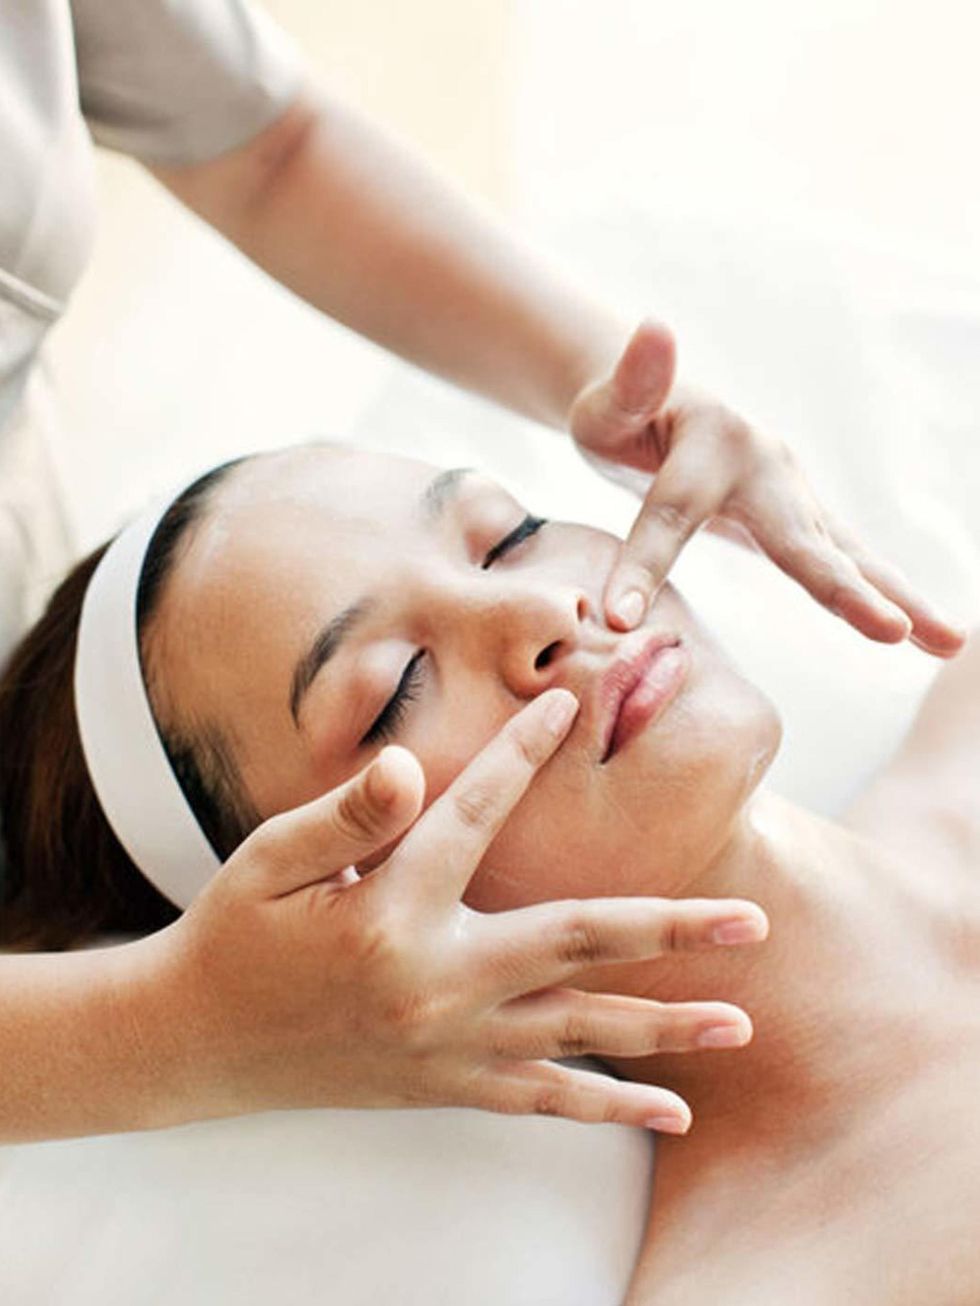 Get yourself booked in for an organic facial. Imelda Burke recommends D